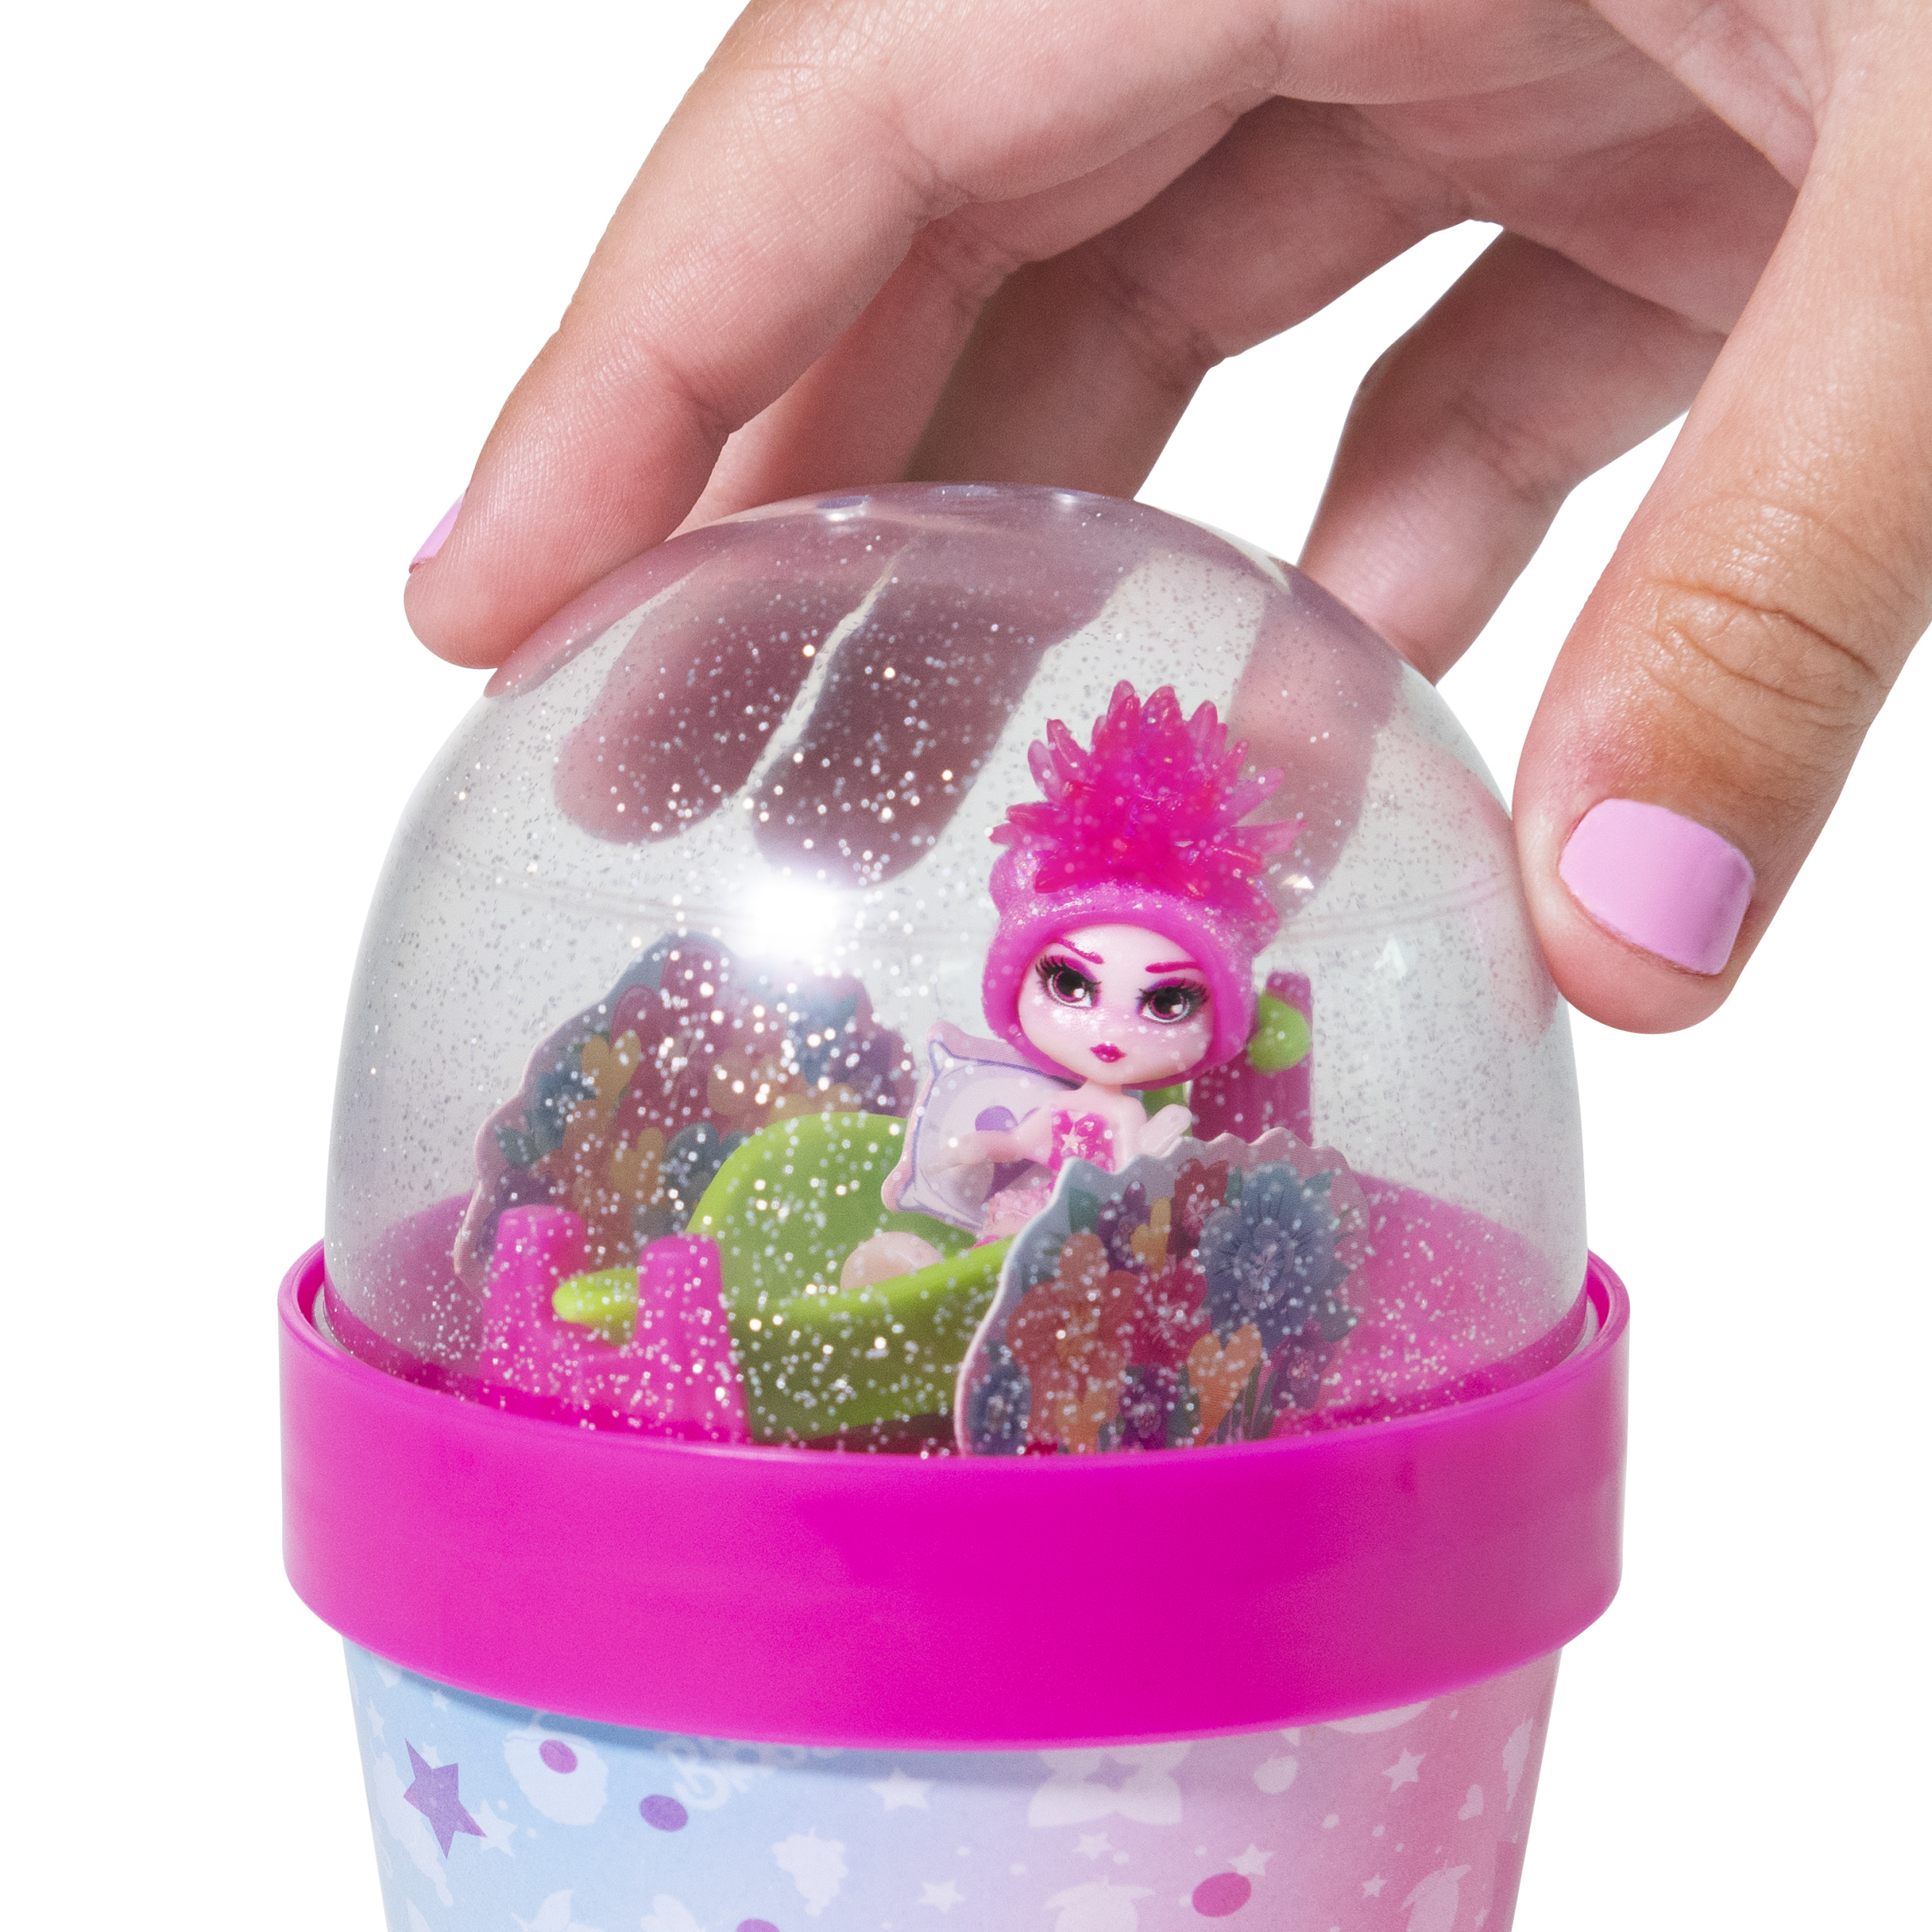 Awesome Bloss’ems, Magical Growing Flower-Themed Scented Collectible Doll (Style May Vary) - image 5 of 8